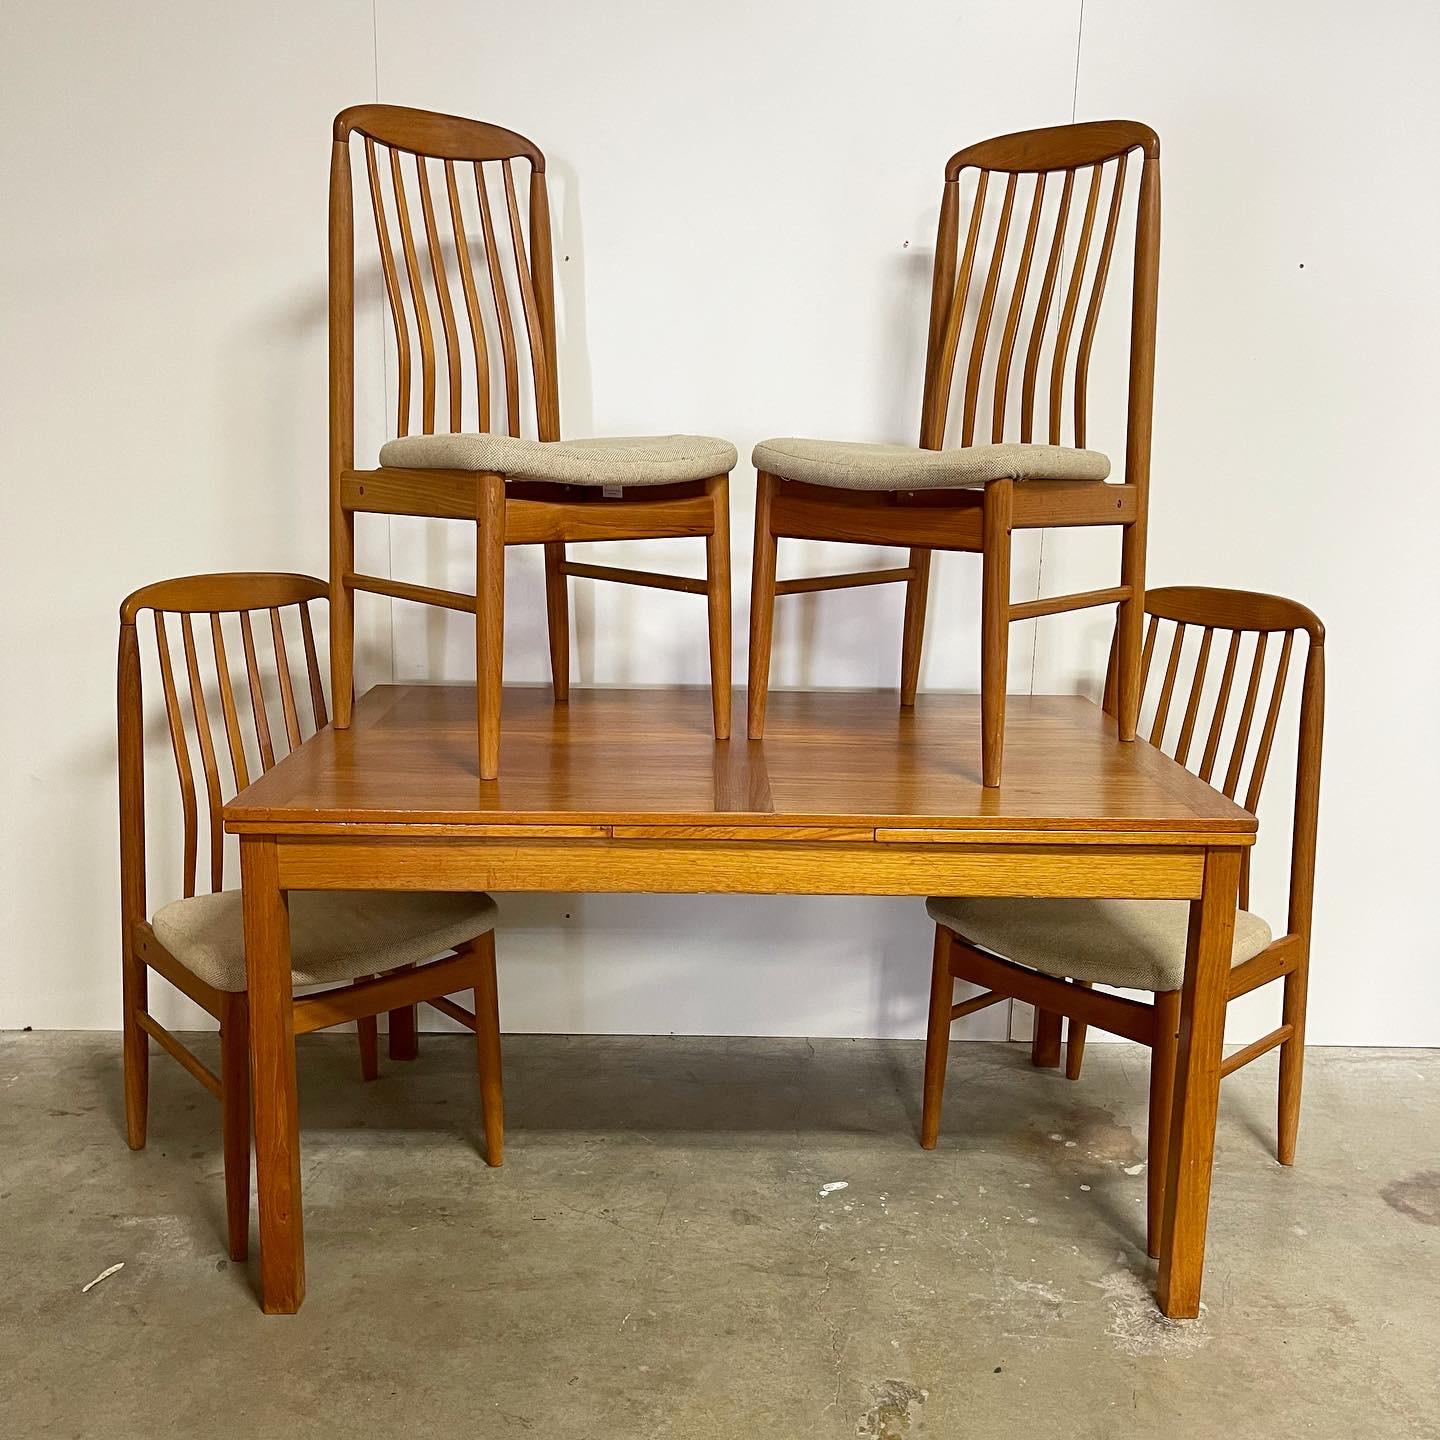 Beautiful Table set. Benny Lindén chairs. All Teak wood. Draw leaf Danish teak table in good condition. One blemish/ding on one corner. Leaves draw nice and smooth! Chairs are INCREDIBLY comfortable and compliment the arch in your back making you